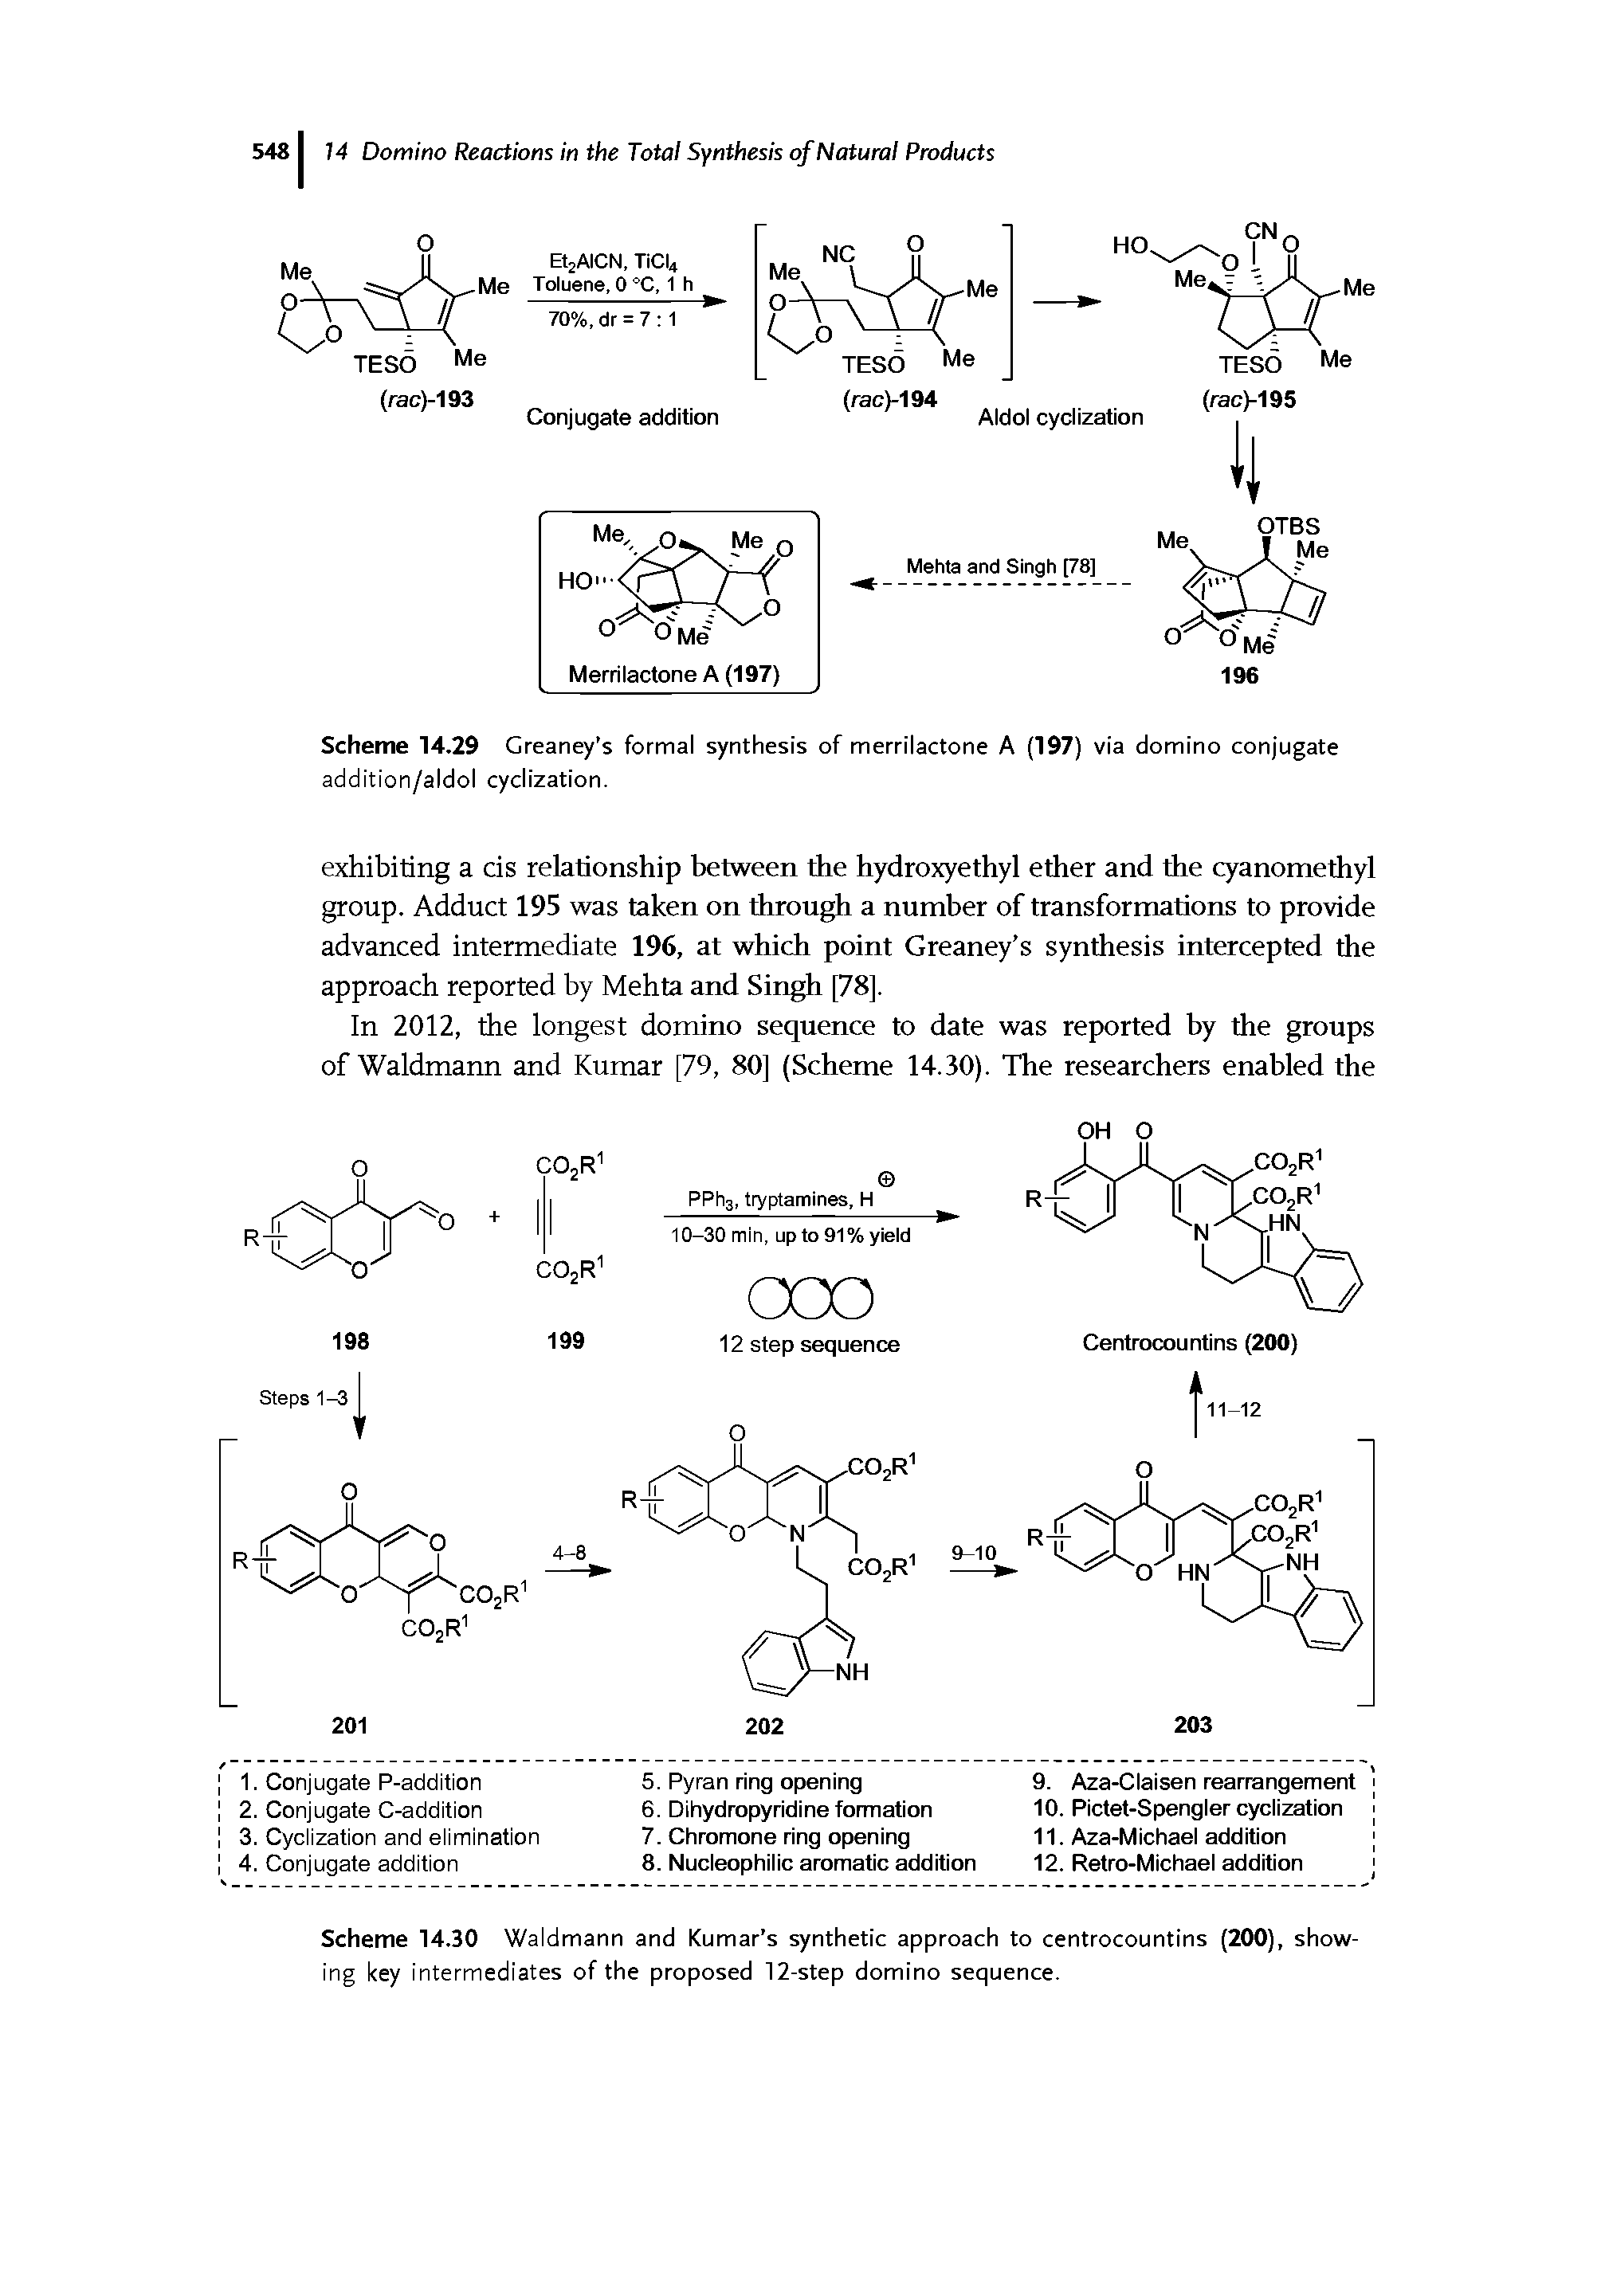 Scheme 14.29 Greaney s formal synthesis of merrilactone A (197) via domino conjugate addition/aldol cyclization.